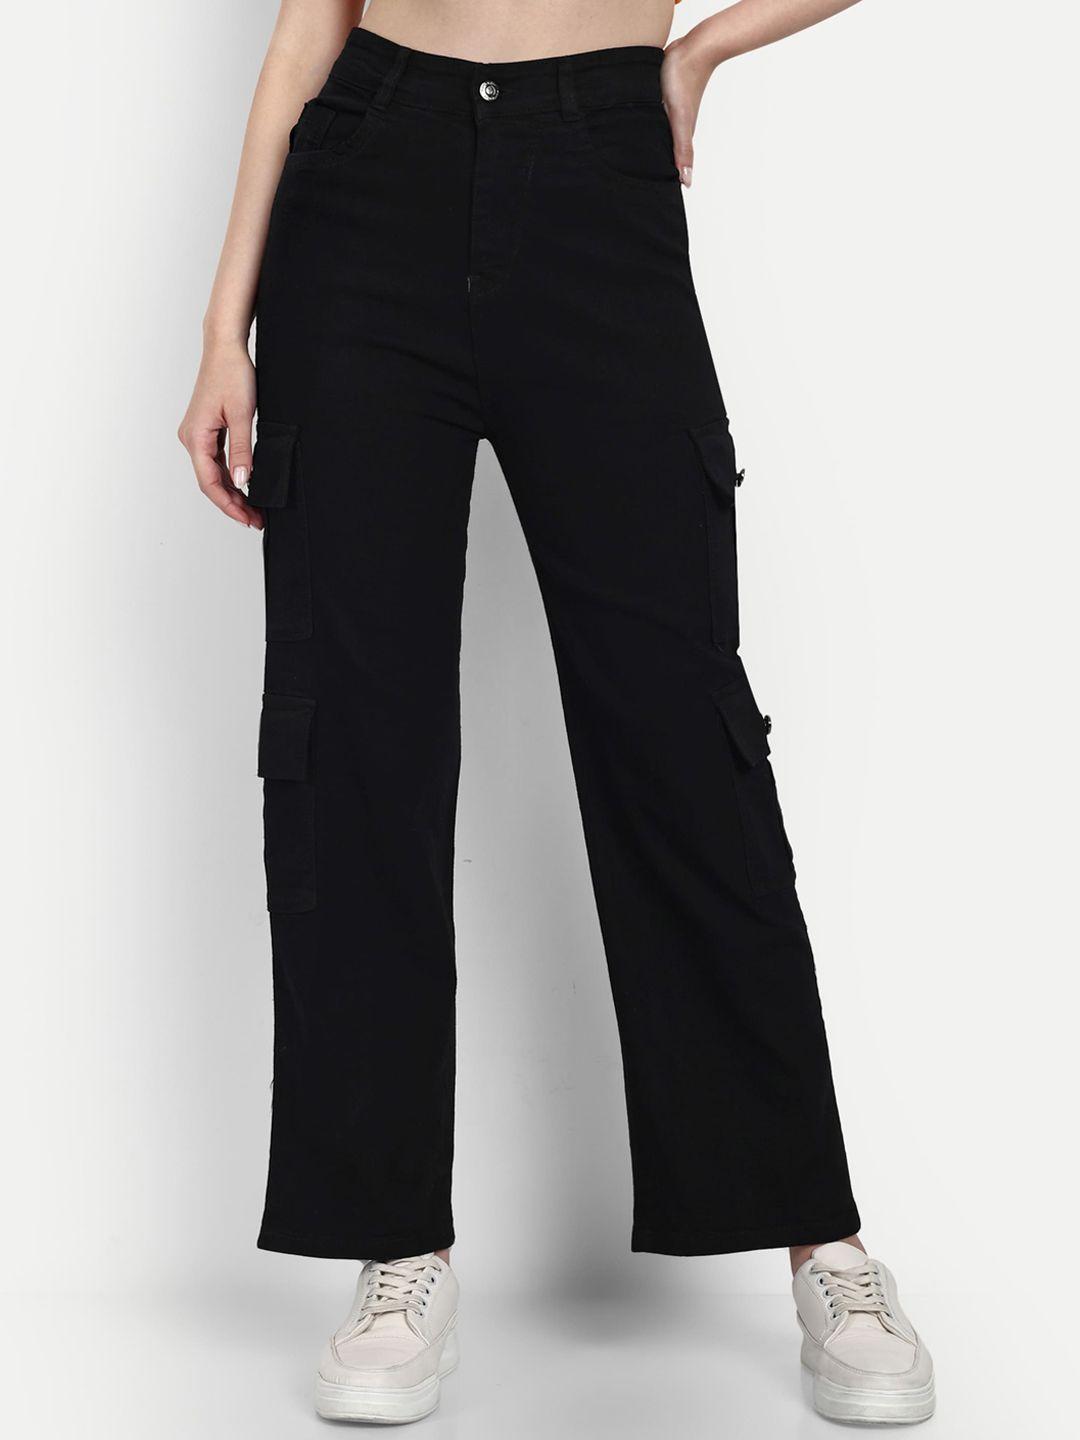 next-one-women-black-smart-wide-leg-high-rise-stretchable-jeans